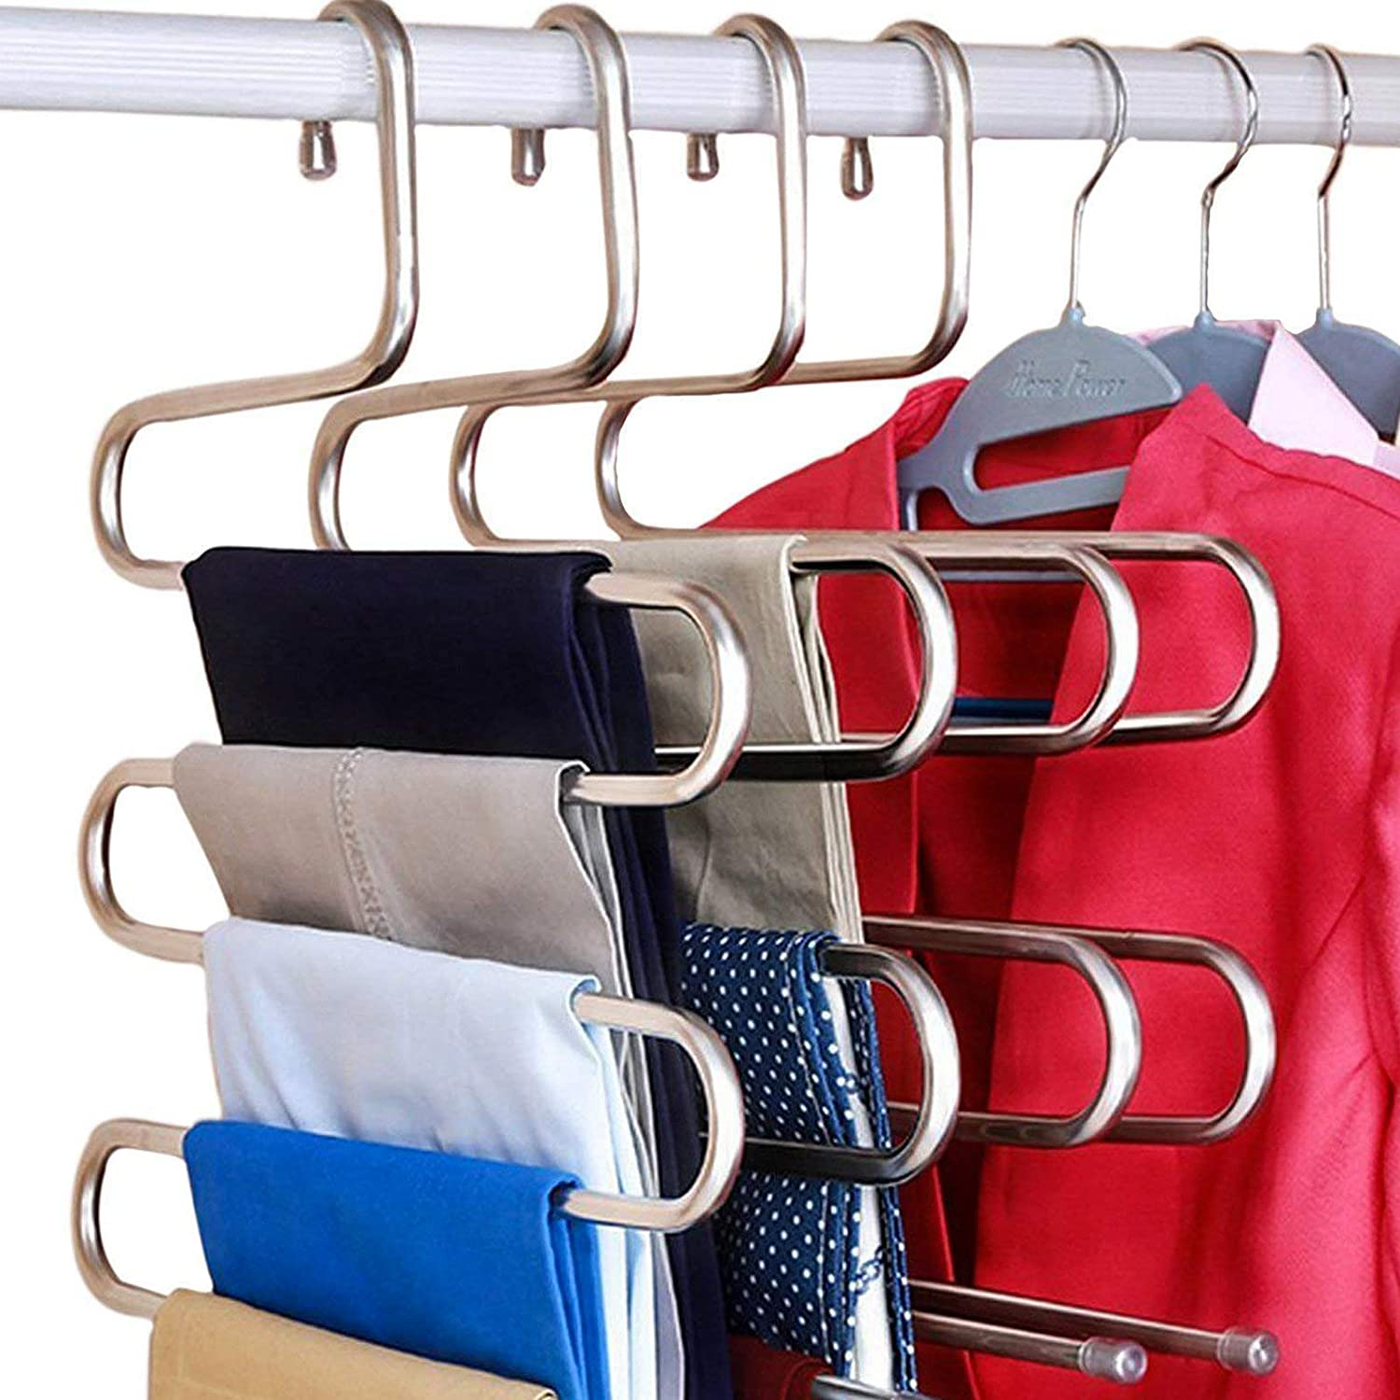 DOIOWN S-Type Stainless Steel Clothes Pants Hangers Closet Storage Organizer for Pants Jeans Scarf Hanging (14.17 x 14.96ins, Set of 3) (3-Pieces)